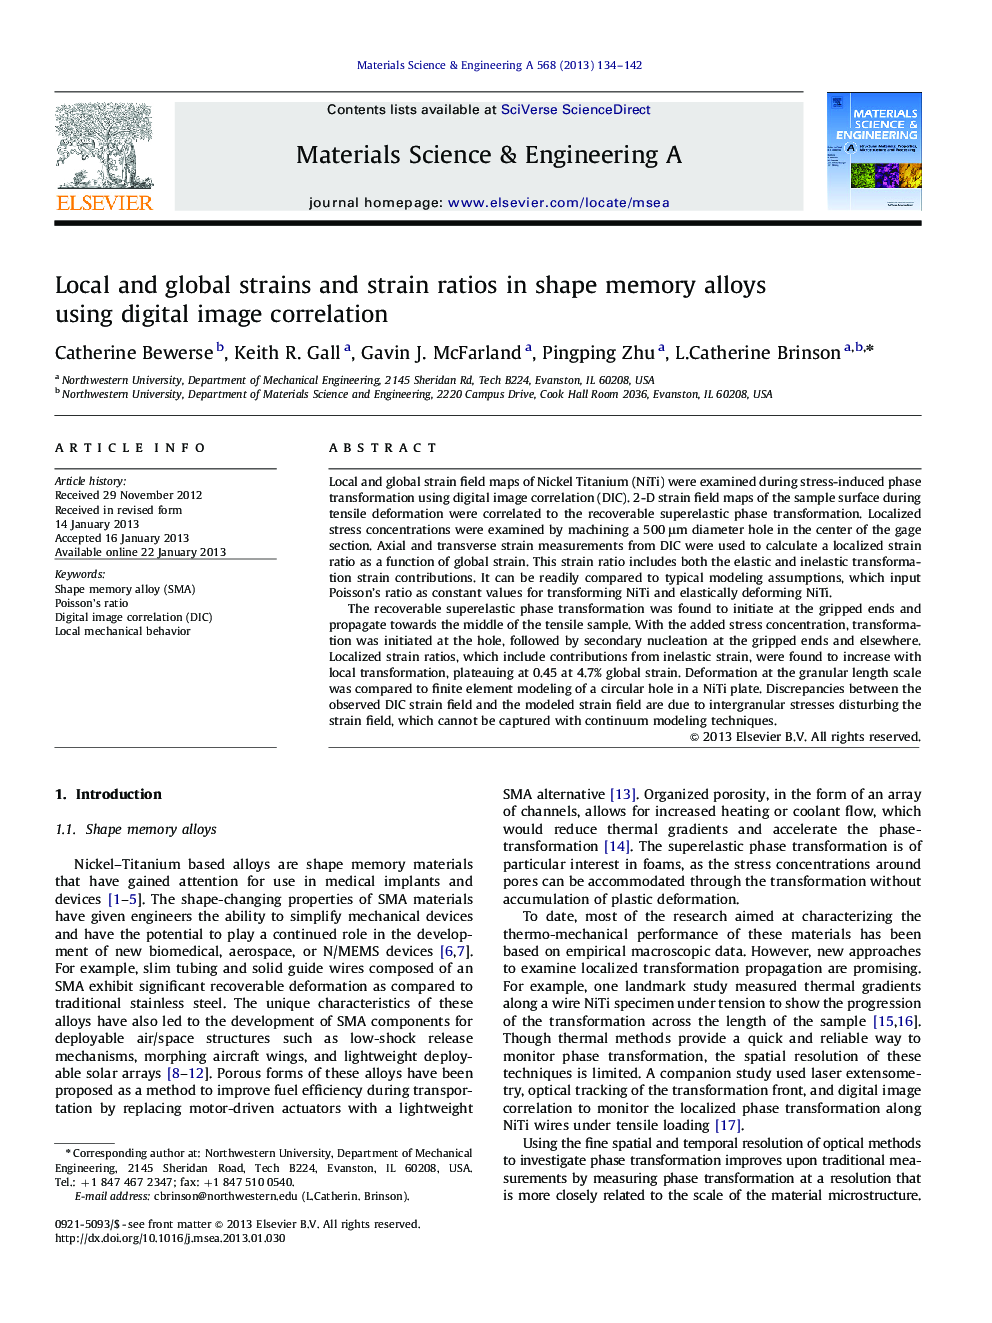 Local and global strains and strain ratios in shape memory alloys using digital imagecorrelation